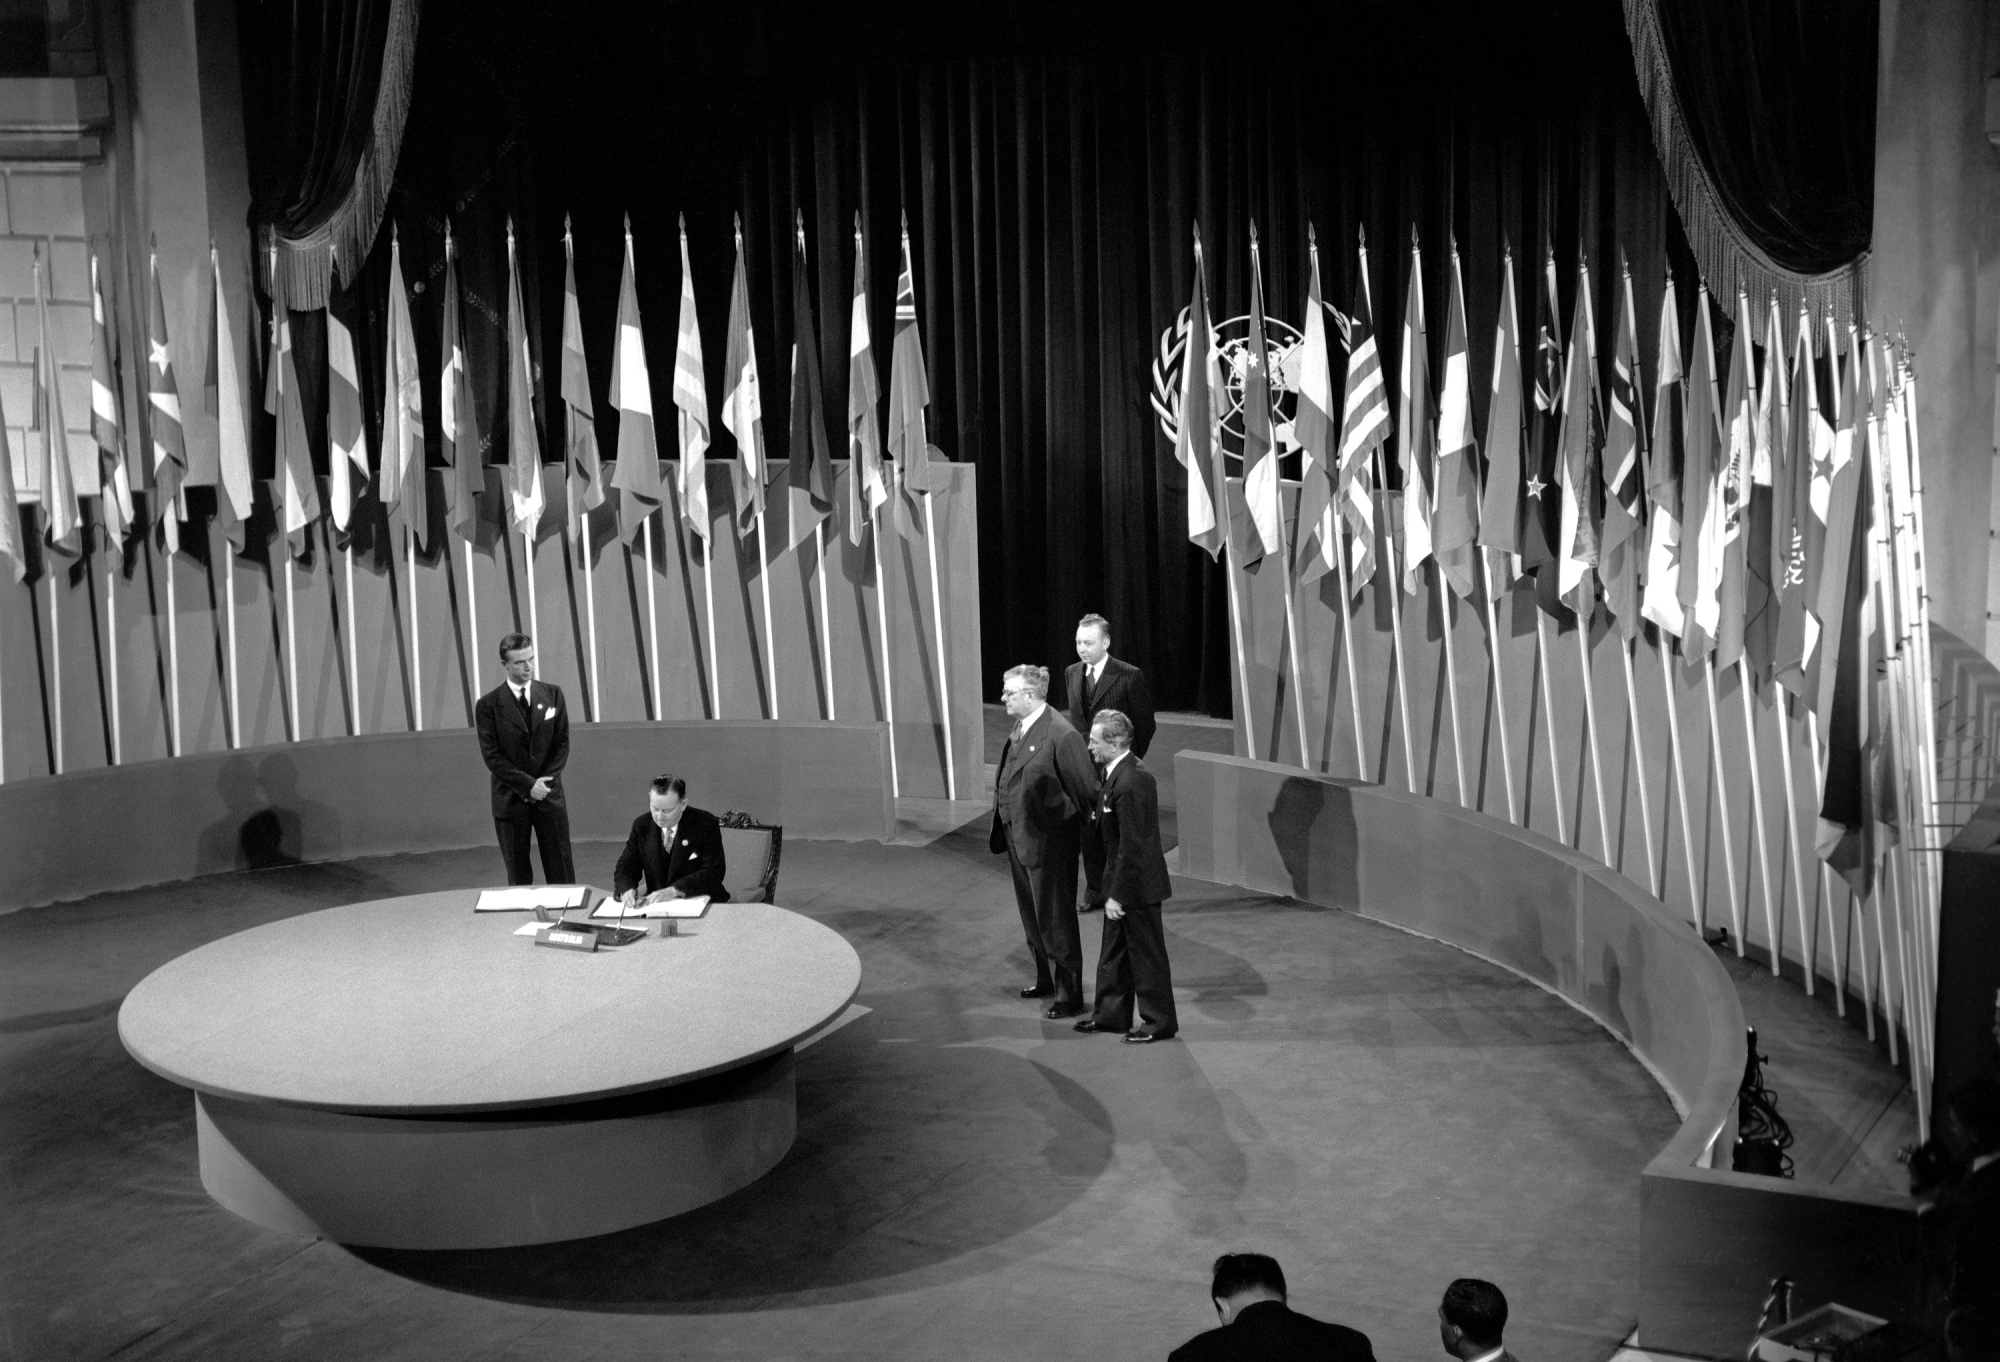 Francis Michael Forde, then Australia’s Deputy Prime Minister, signing the UN Charter at a ceremony held in San Francisco, 26 June 1945.